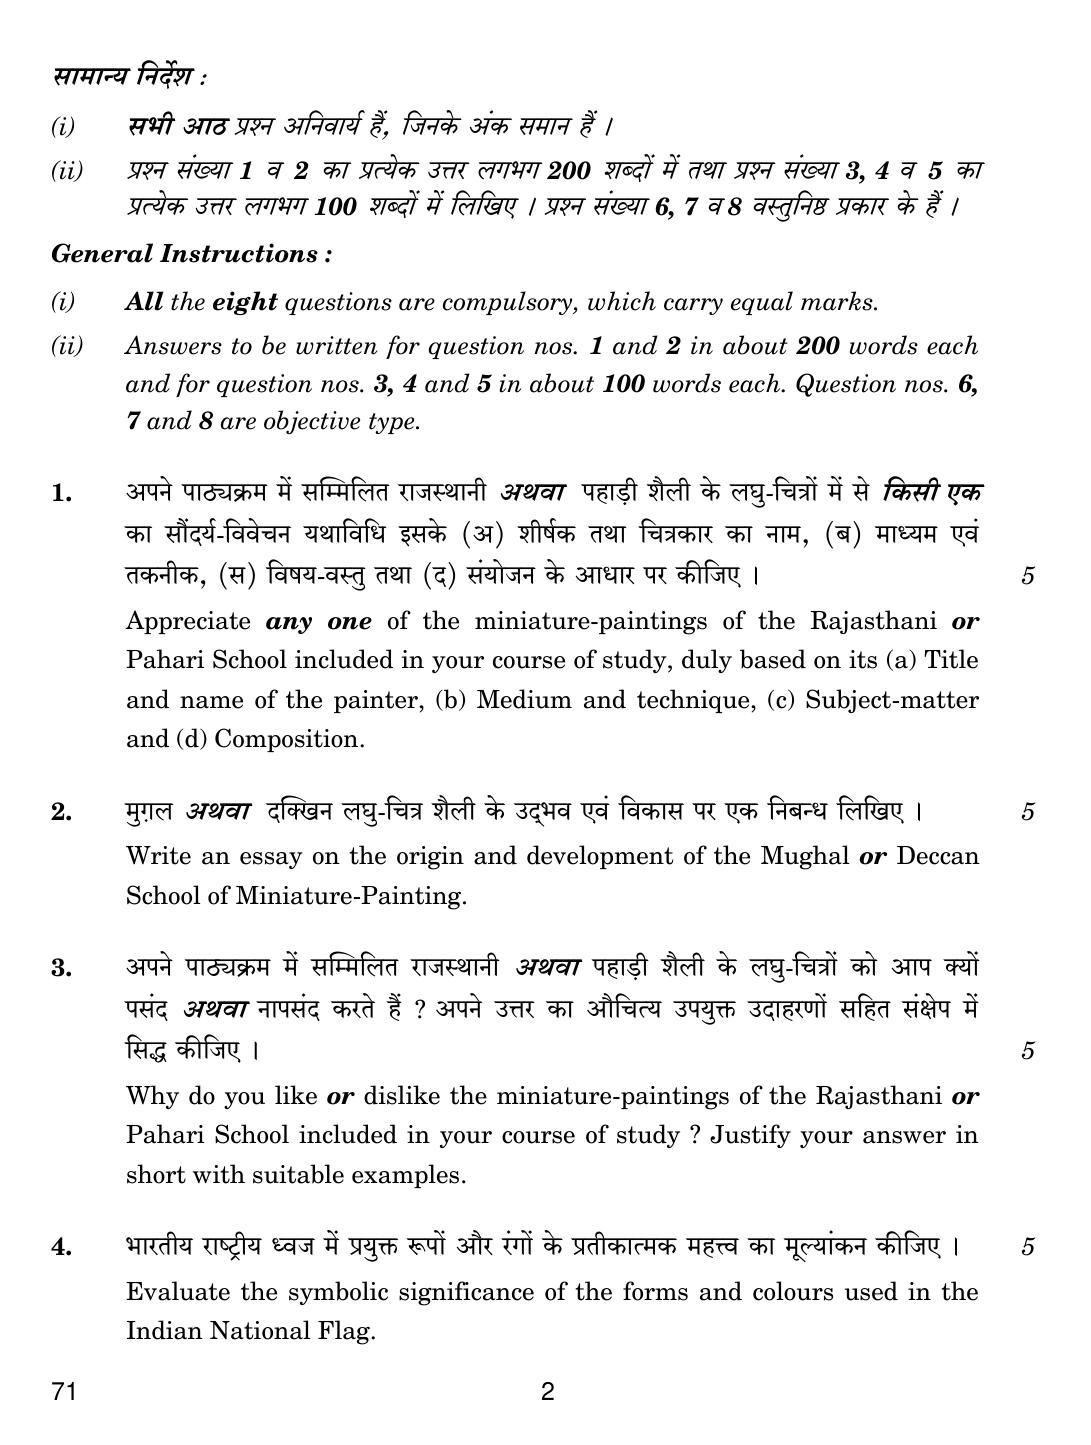 CBSE Class 12 71 PAINTING 2019 Compartment Question Paper - Page 2